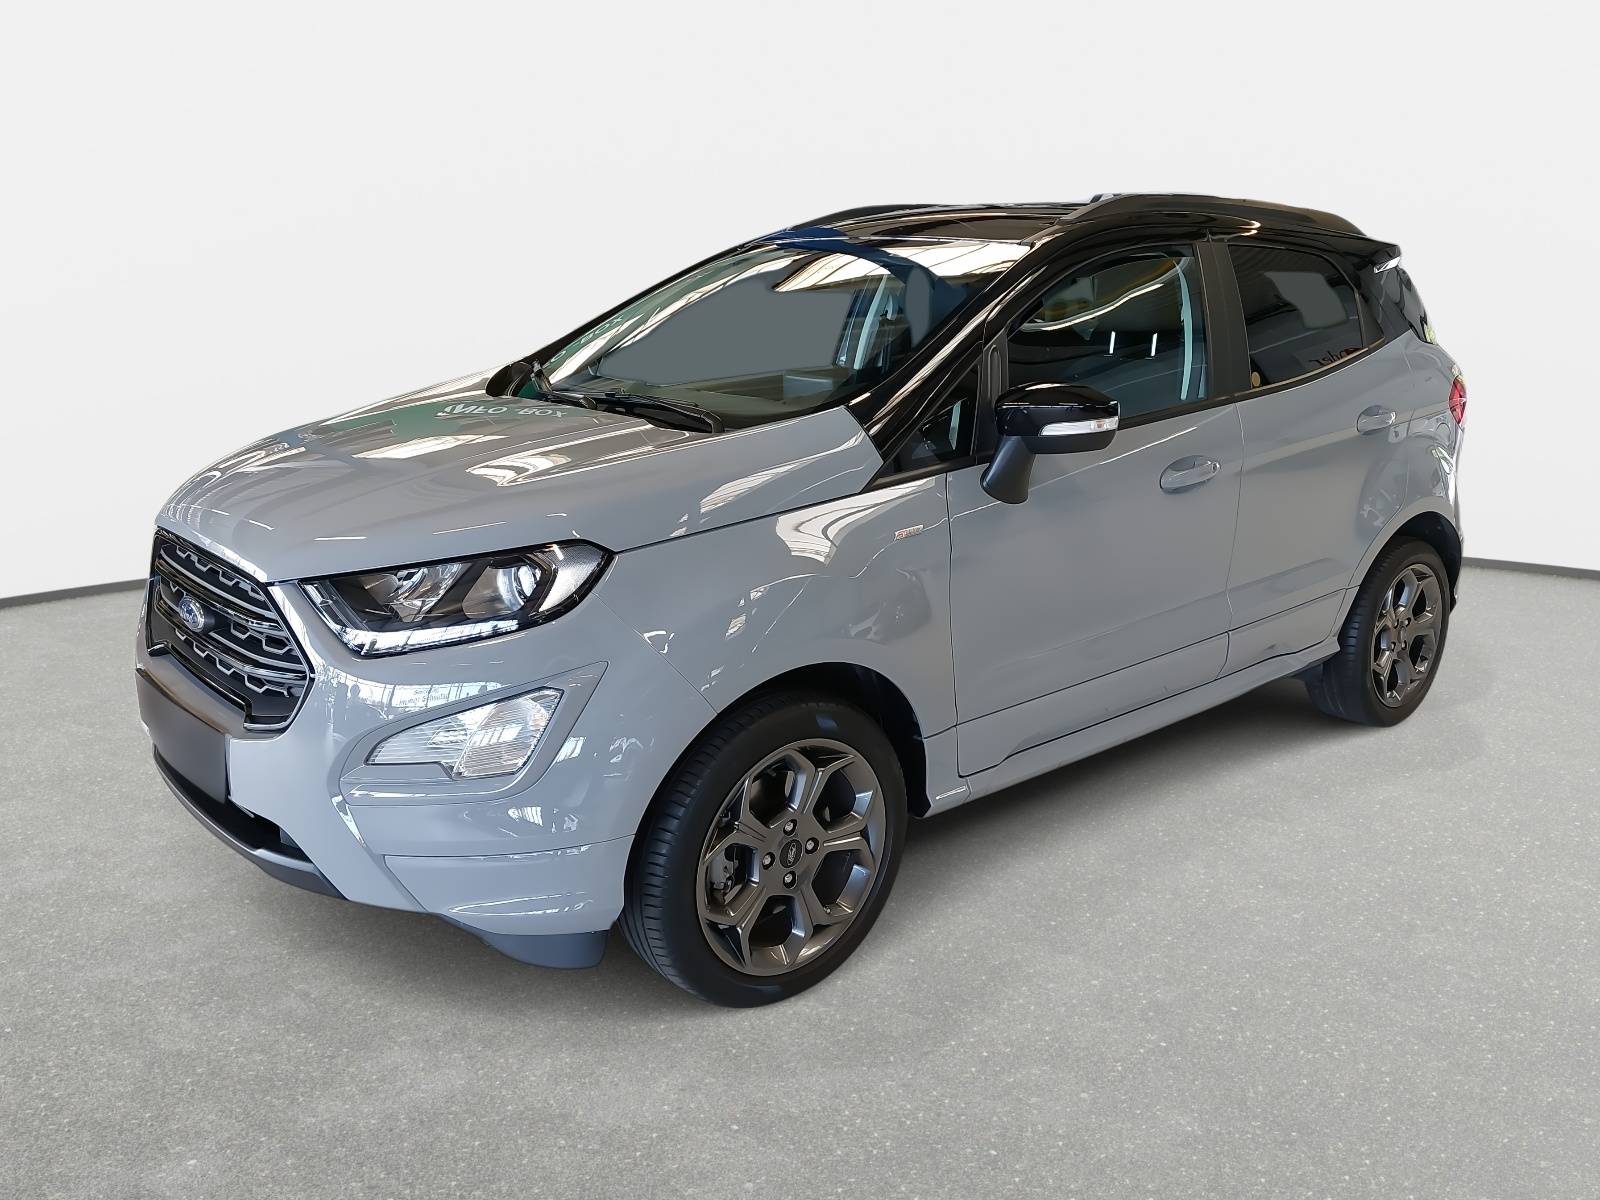 Details FORD 1.0 ECOSPORT - 49633 DAB PDC ST-LINE ECOBOOST - WINTERPAKET AUTO. LED